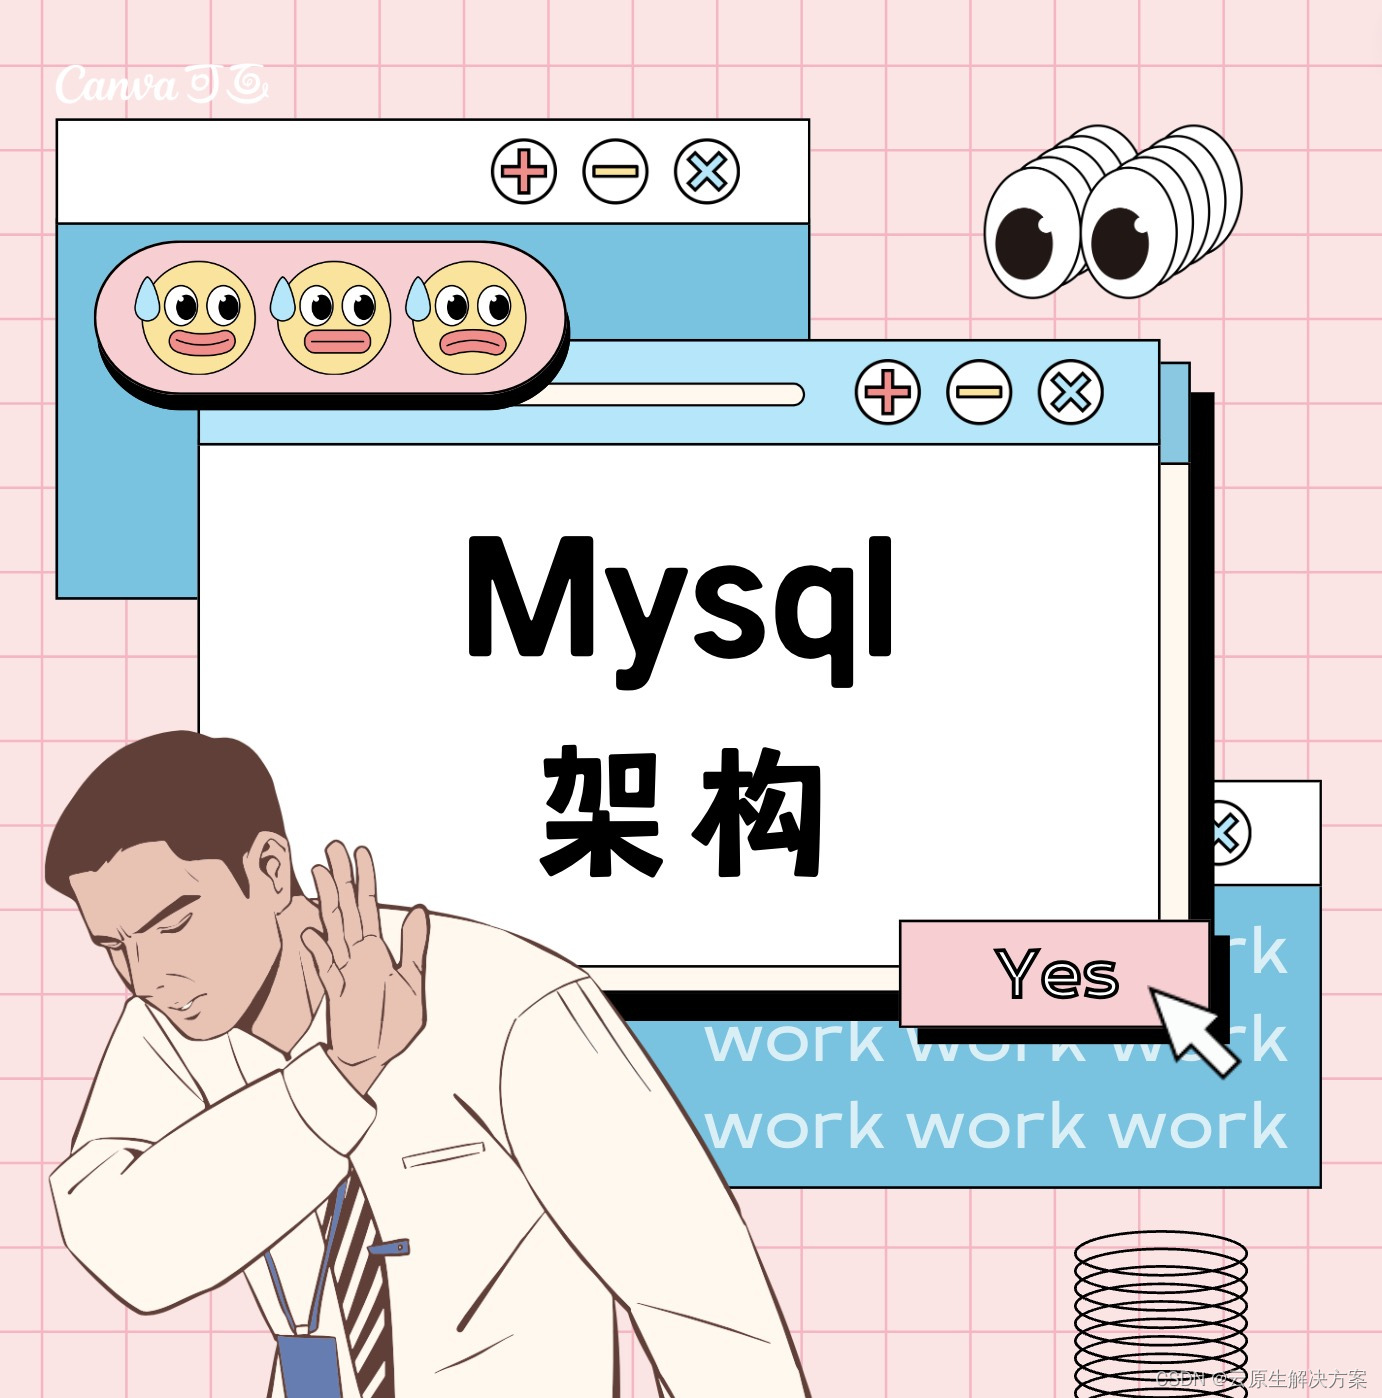 <span style='color:red;'>你</span><span style='color:red;'>知道</span>Mysql的架构<span style='color:red;'>吗</span>？